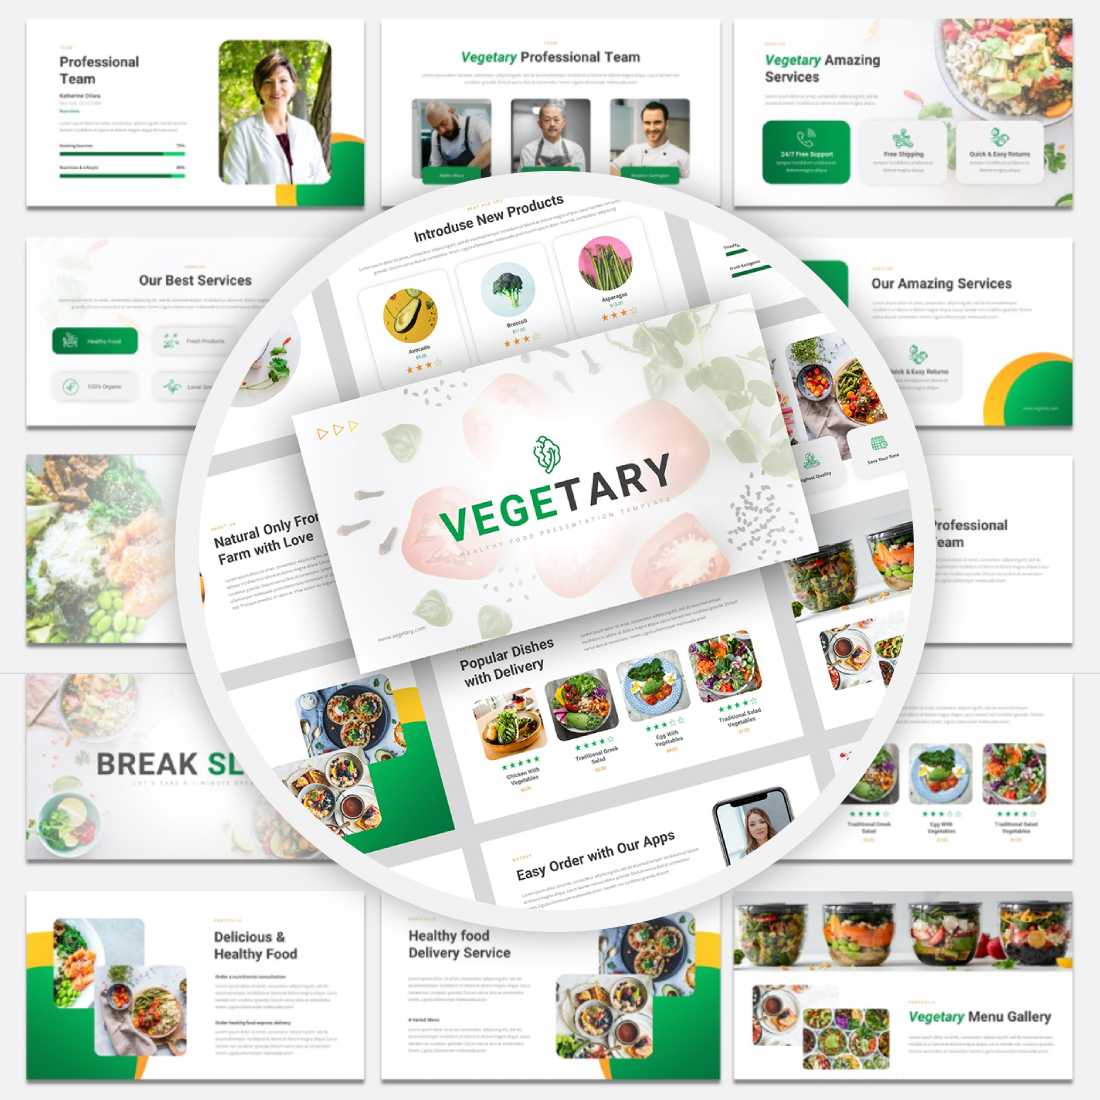 Vegetary - Healthy Food Presentation PowerPoint Template cover image.